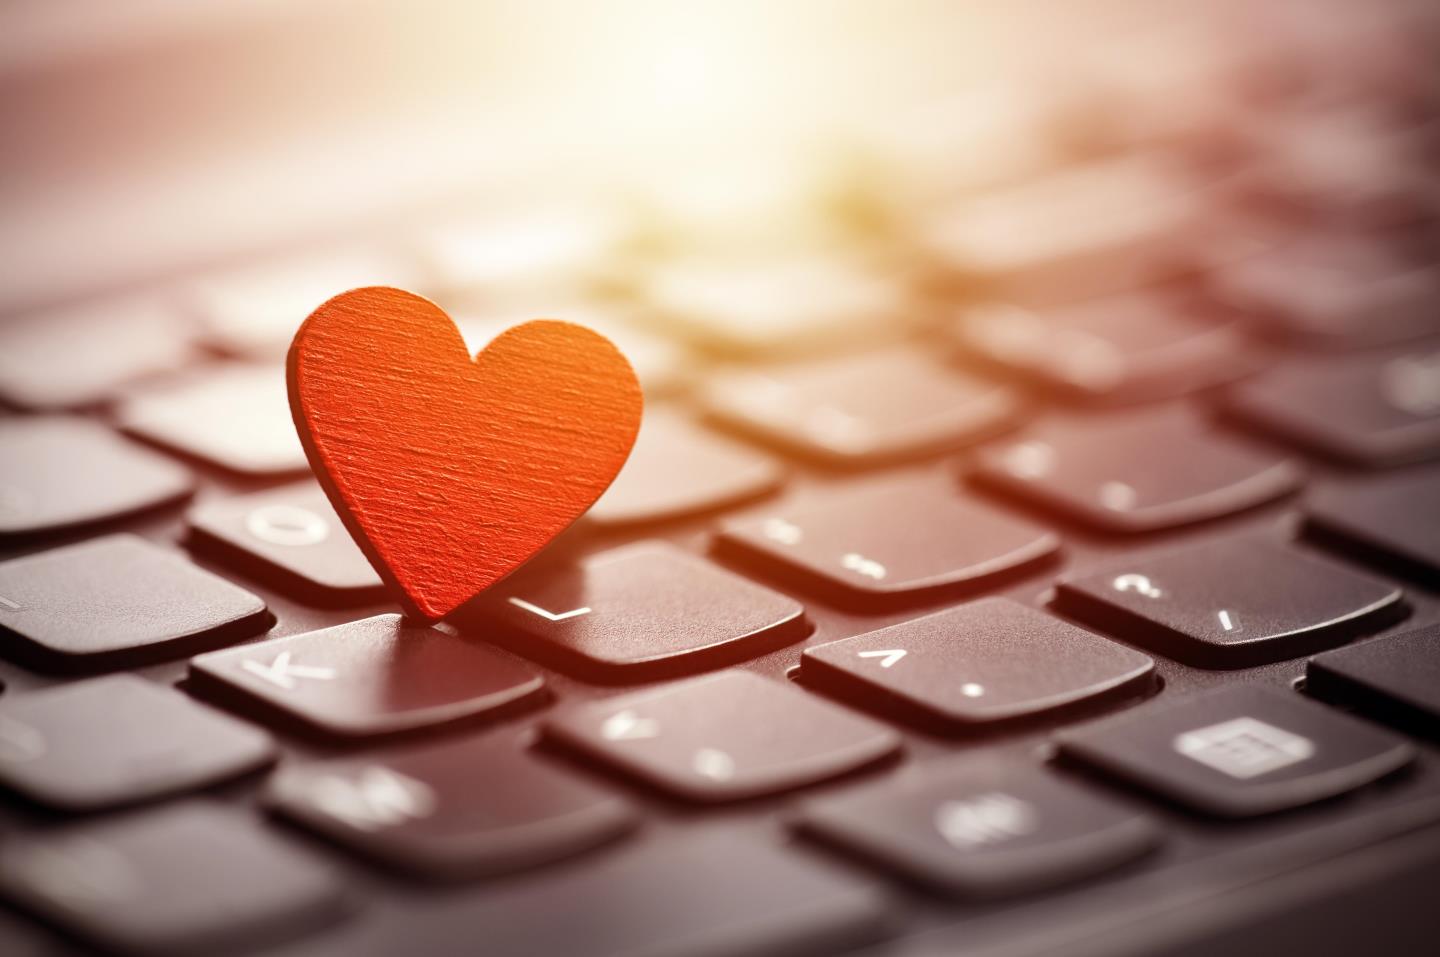 A love heart placed on a keyboard